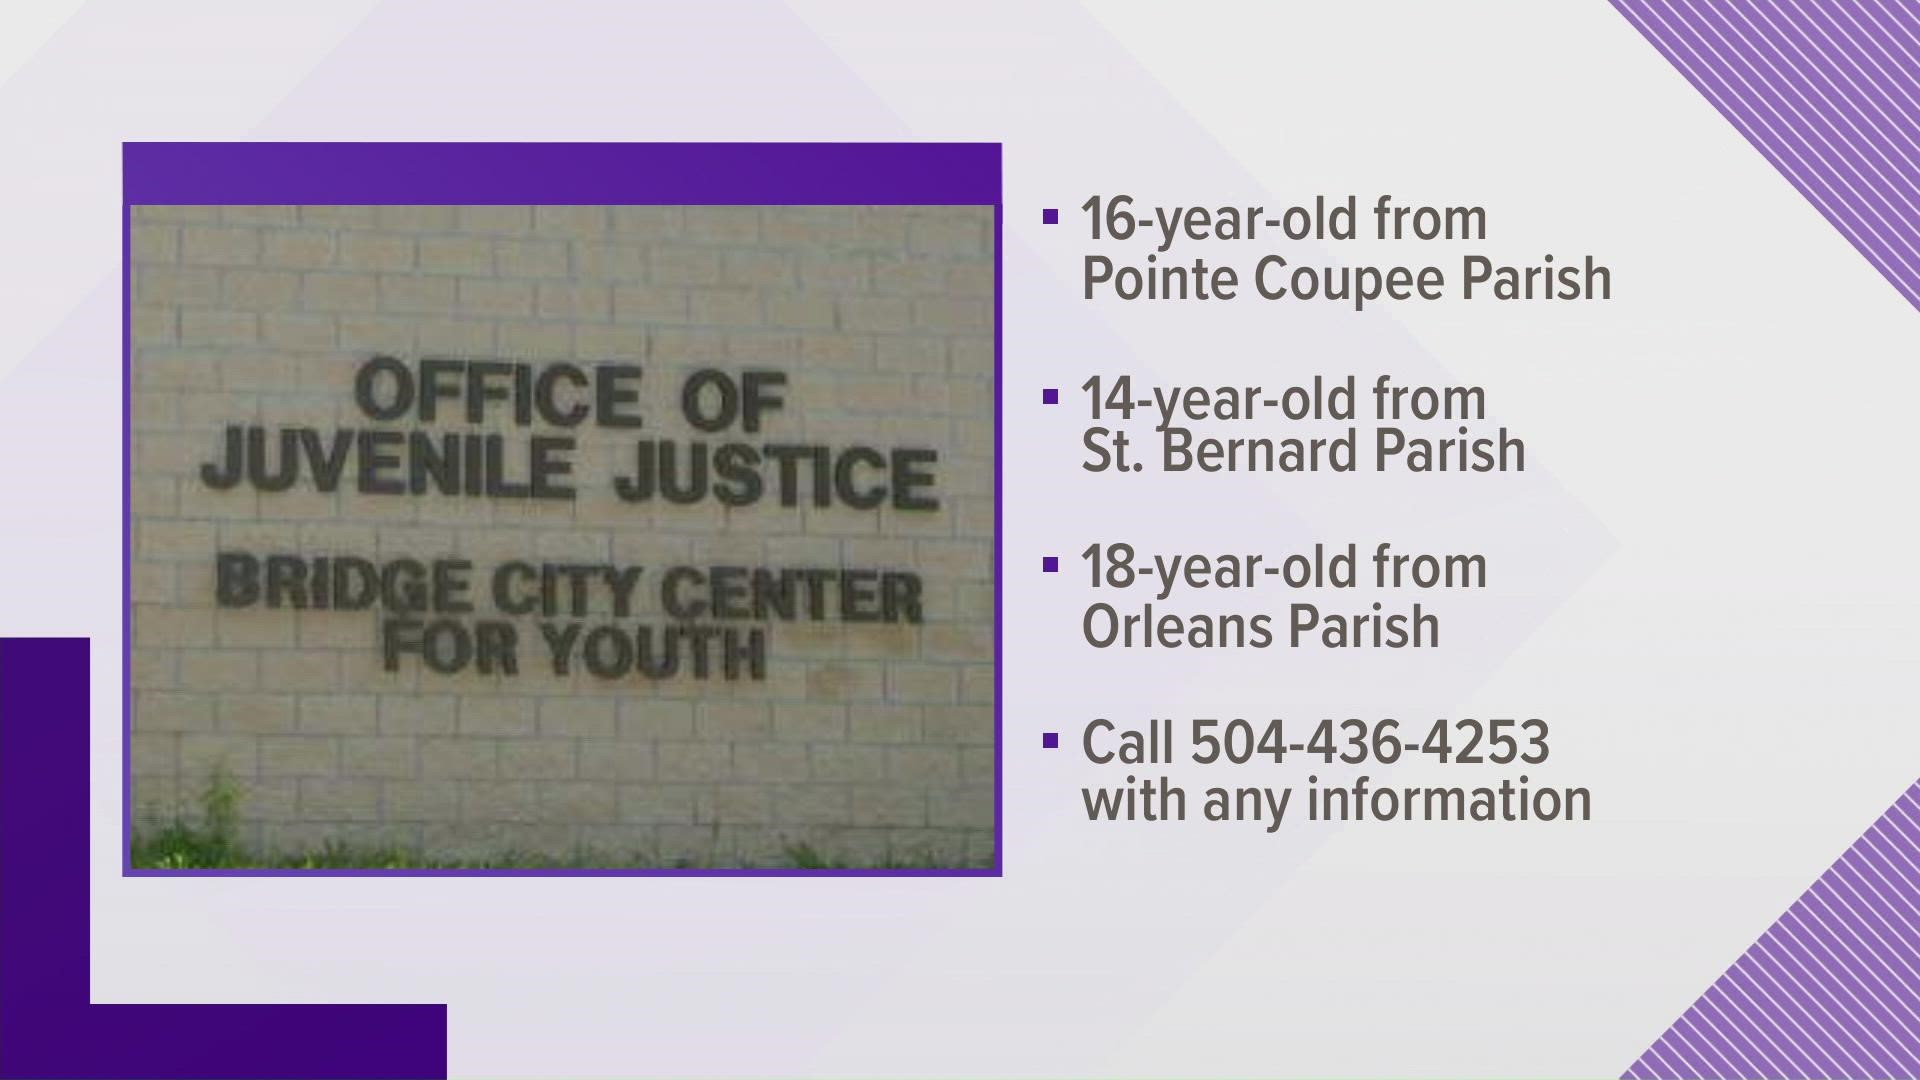 The Office of Juvenile Justice is searching for 3 juveniles that escaped from the Bridge City youth center early Sunday morning.